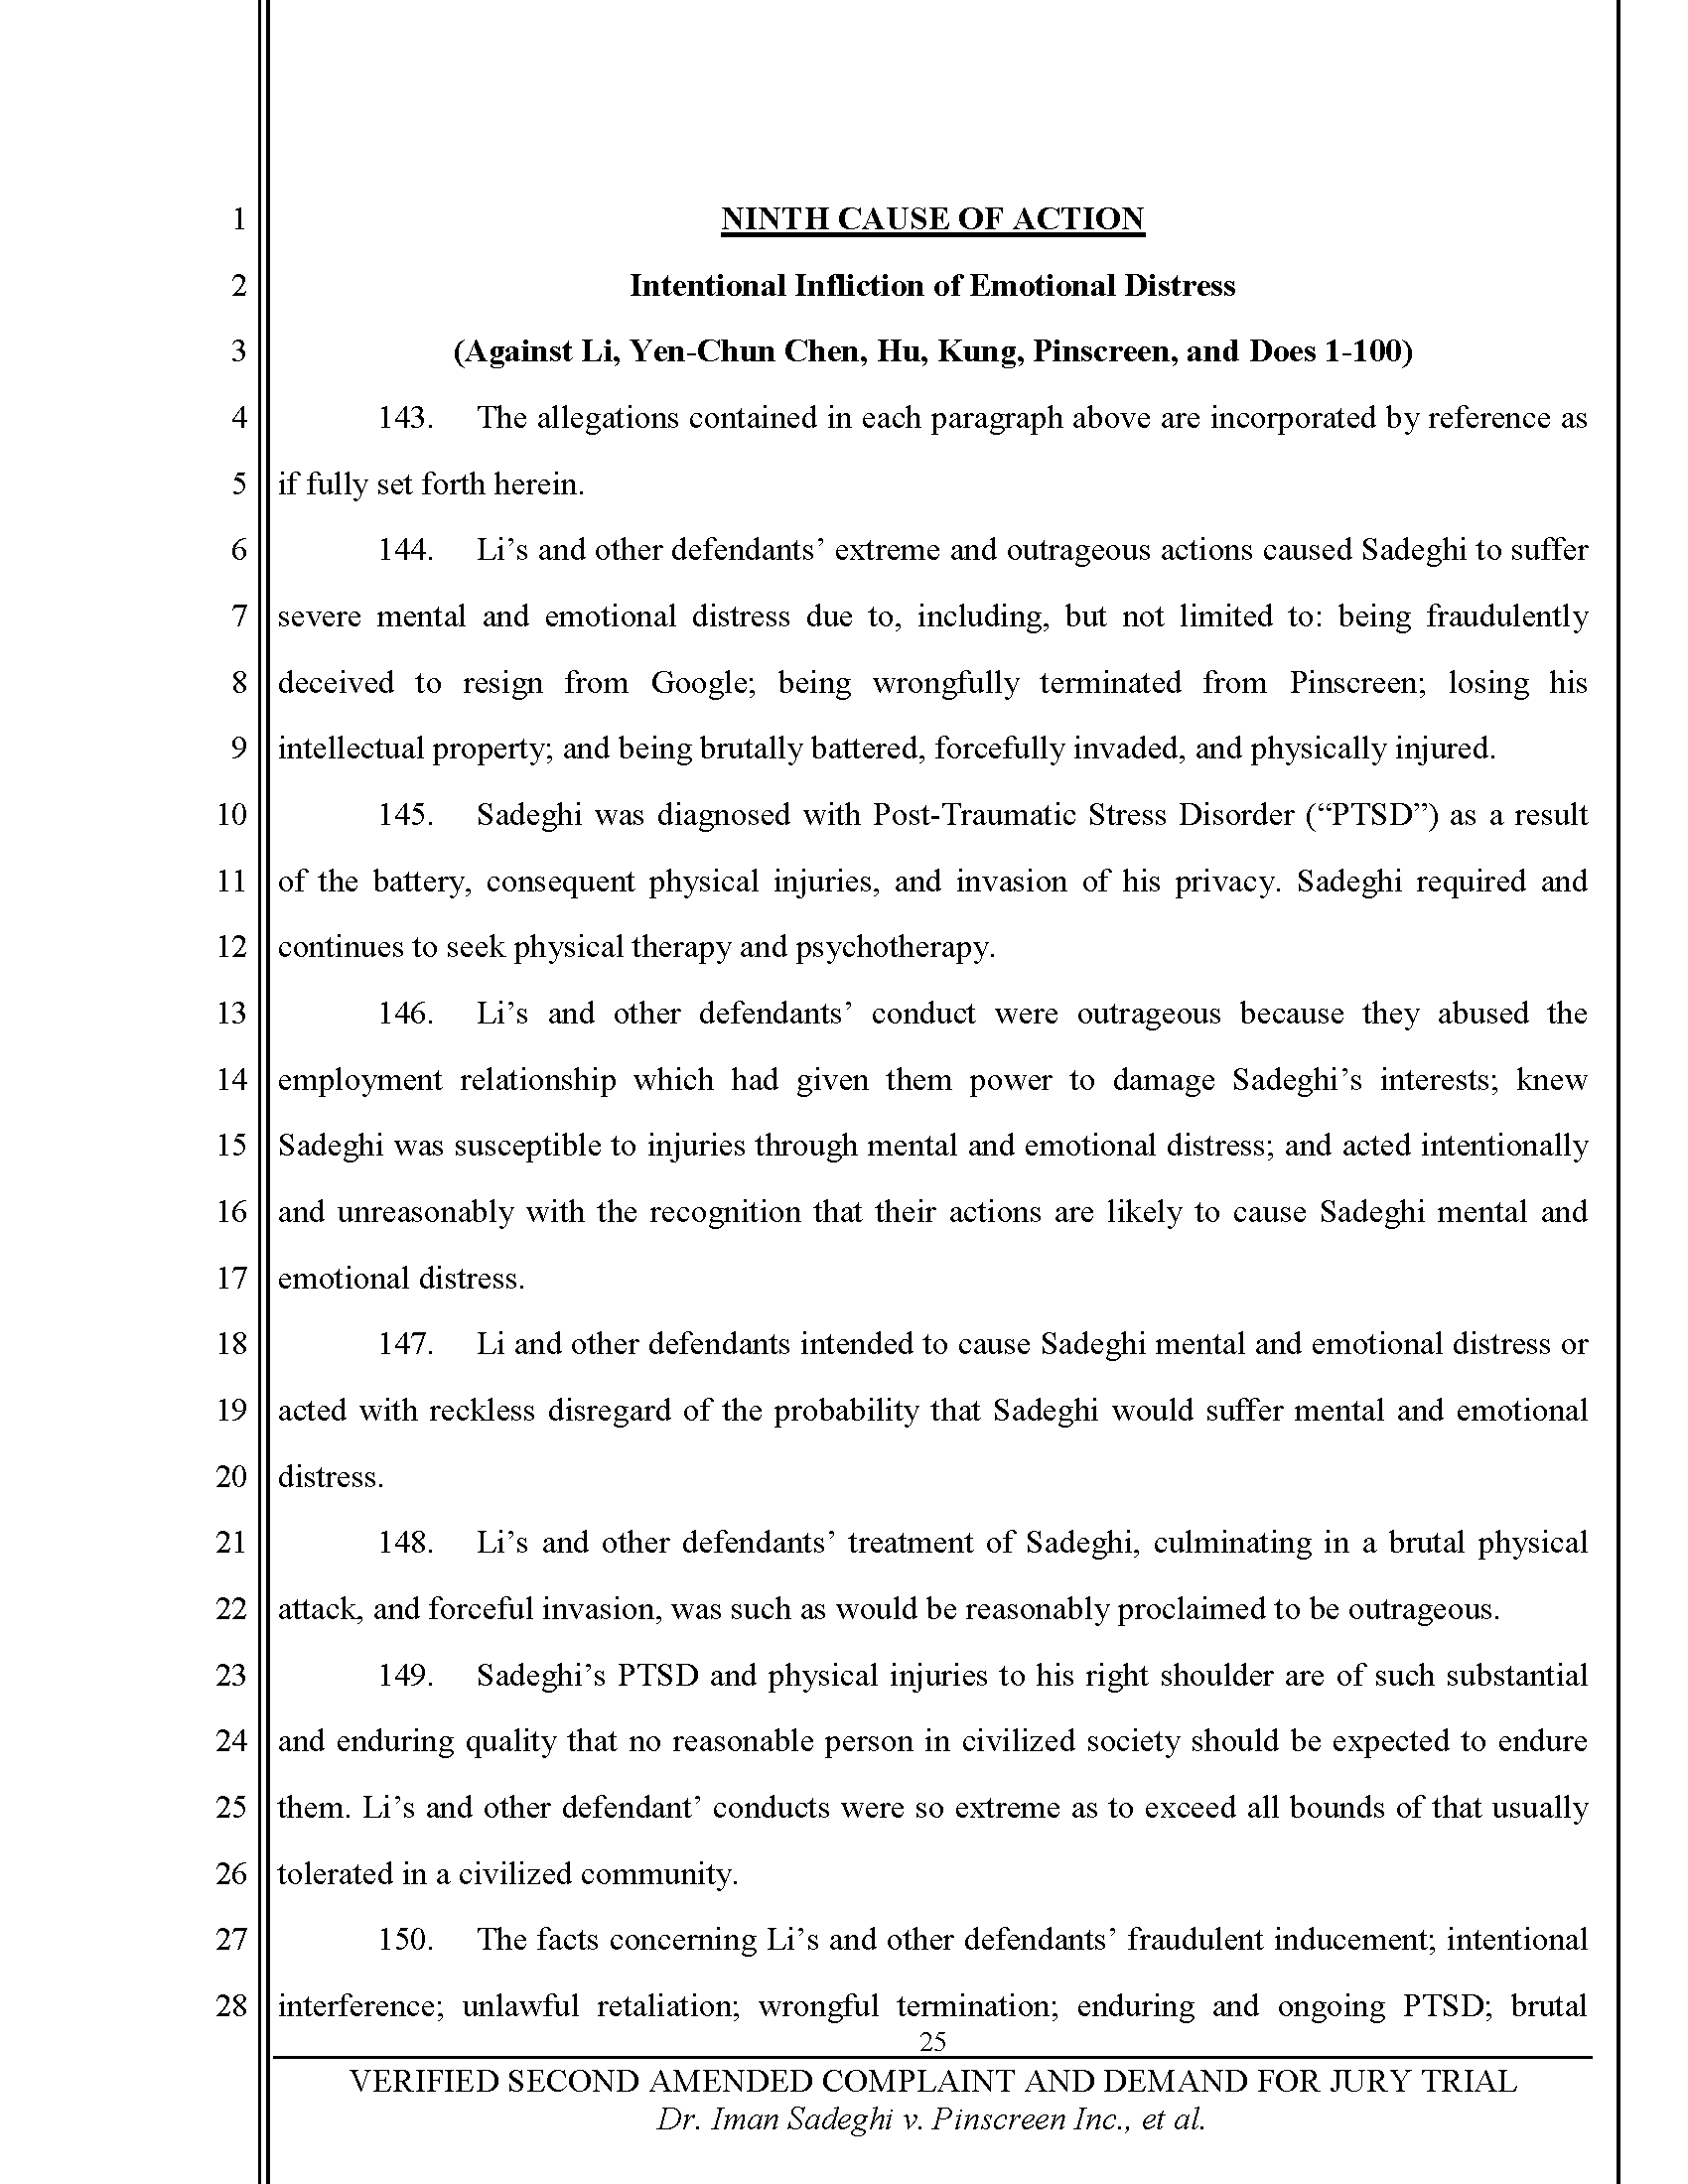 Second Amended Complaint (SAC) Page 26